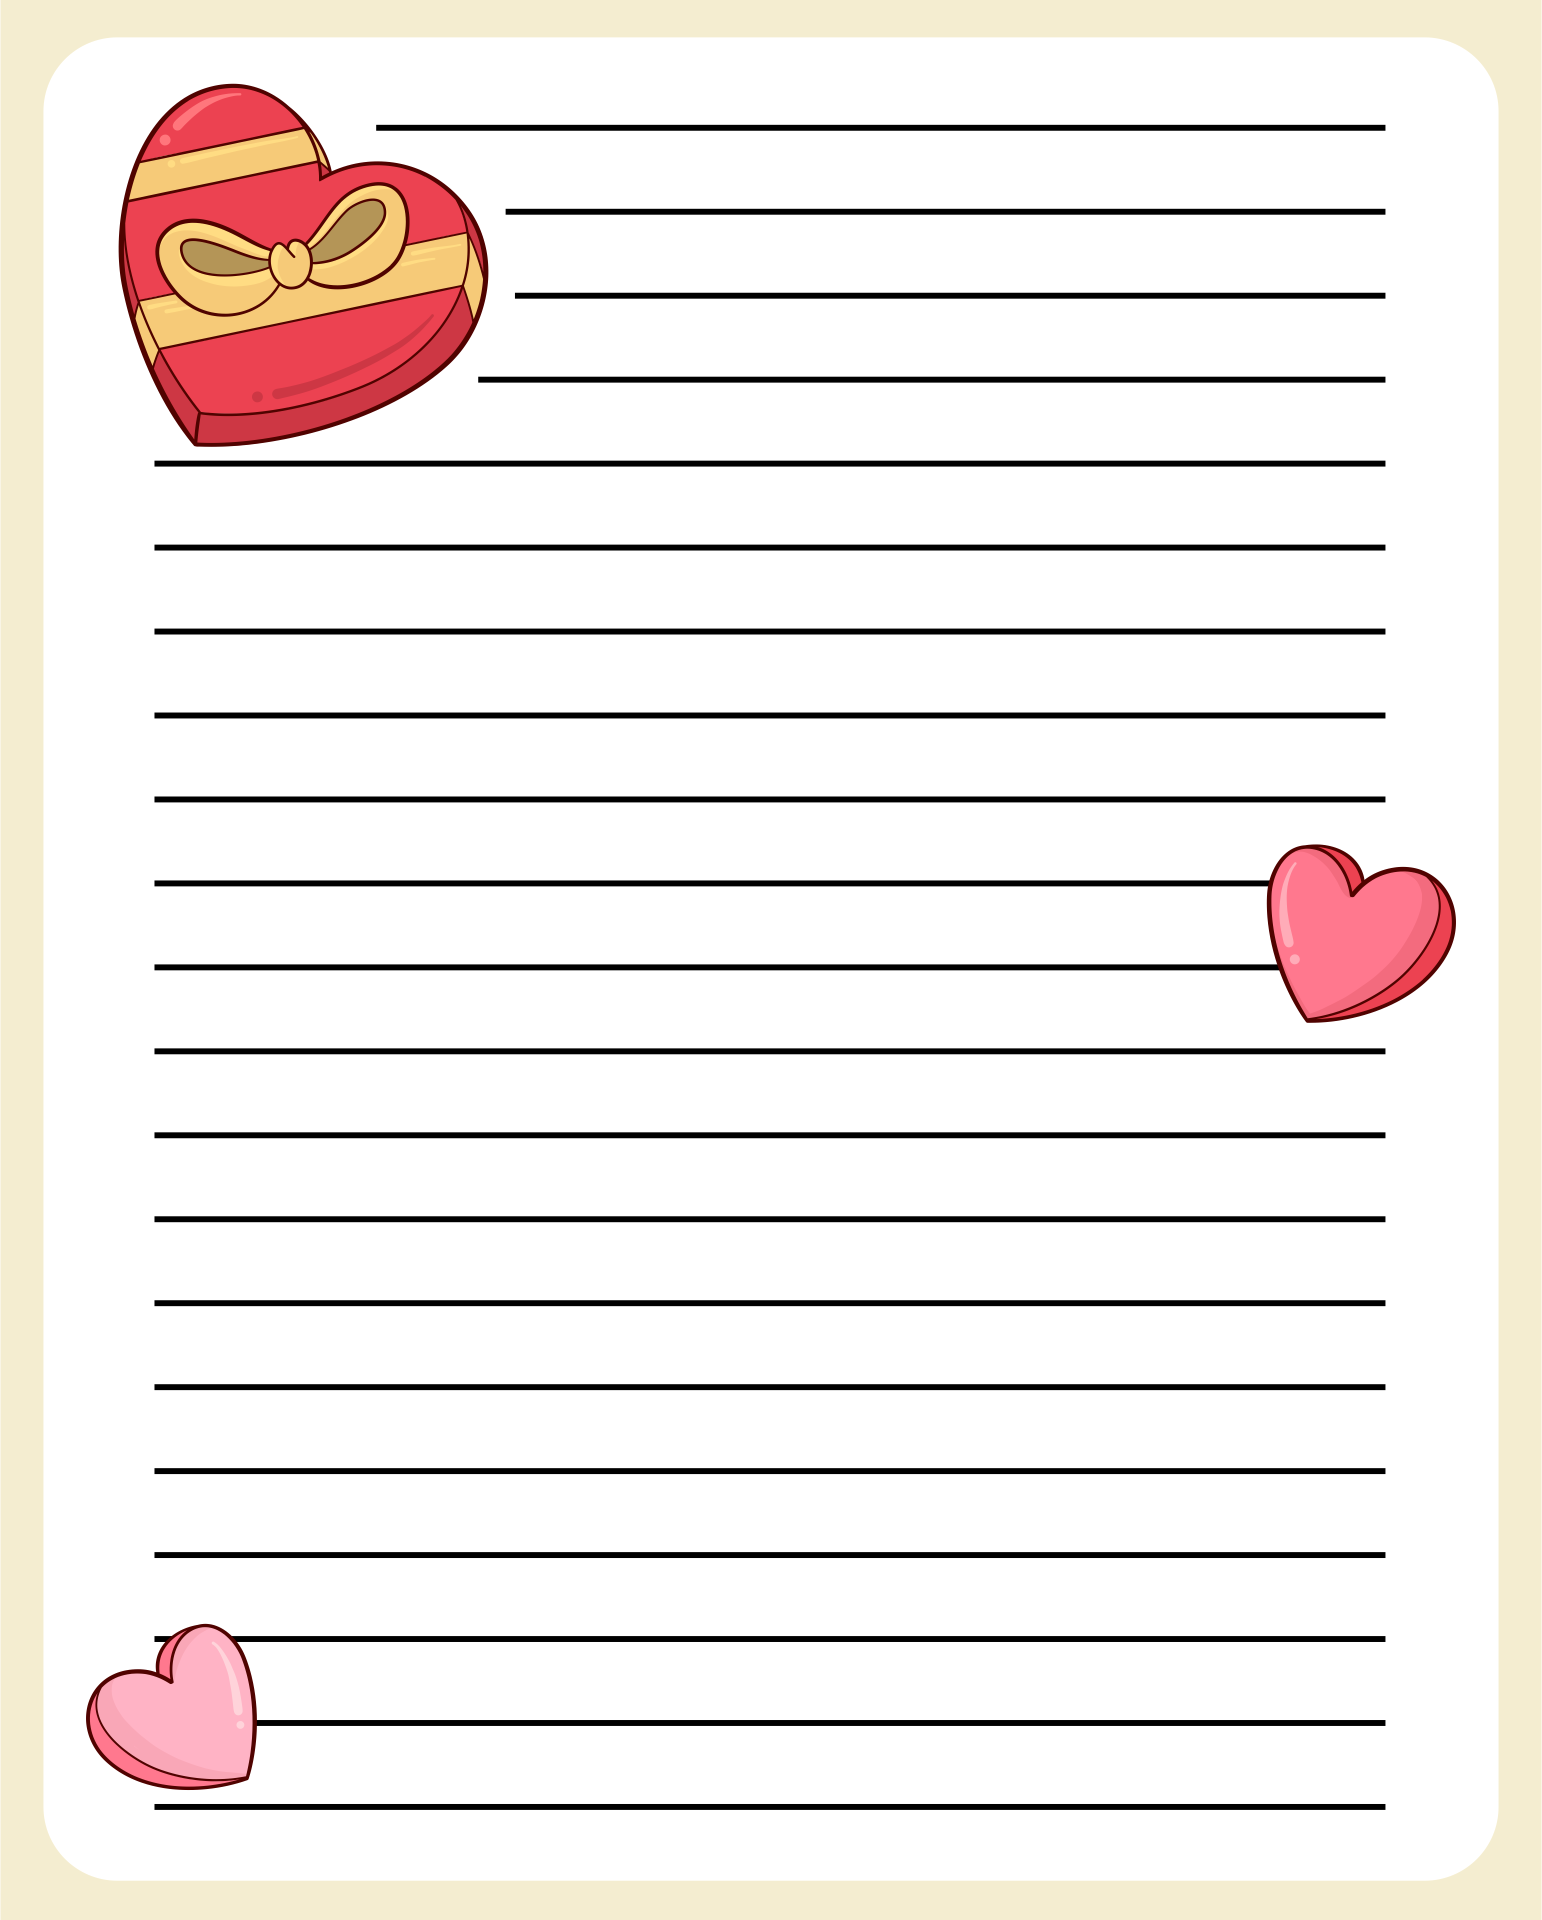 9 Best Images of Love Letter Templates Printable - Free Printable Love ...